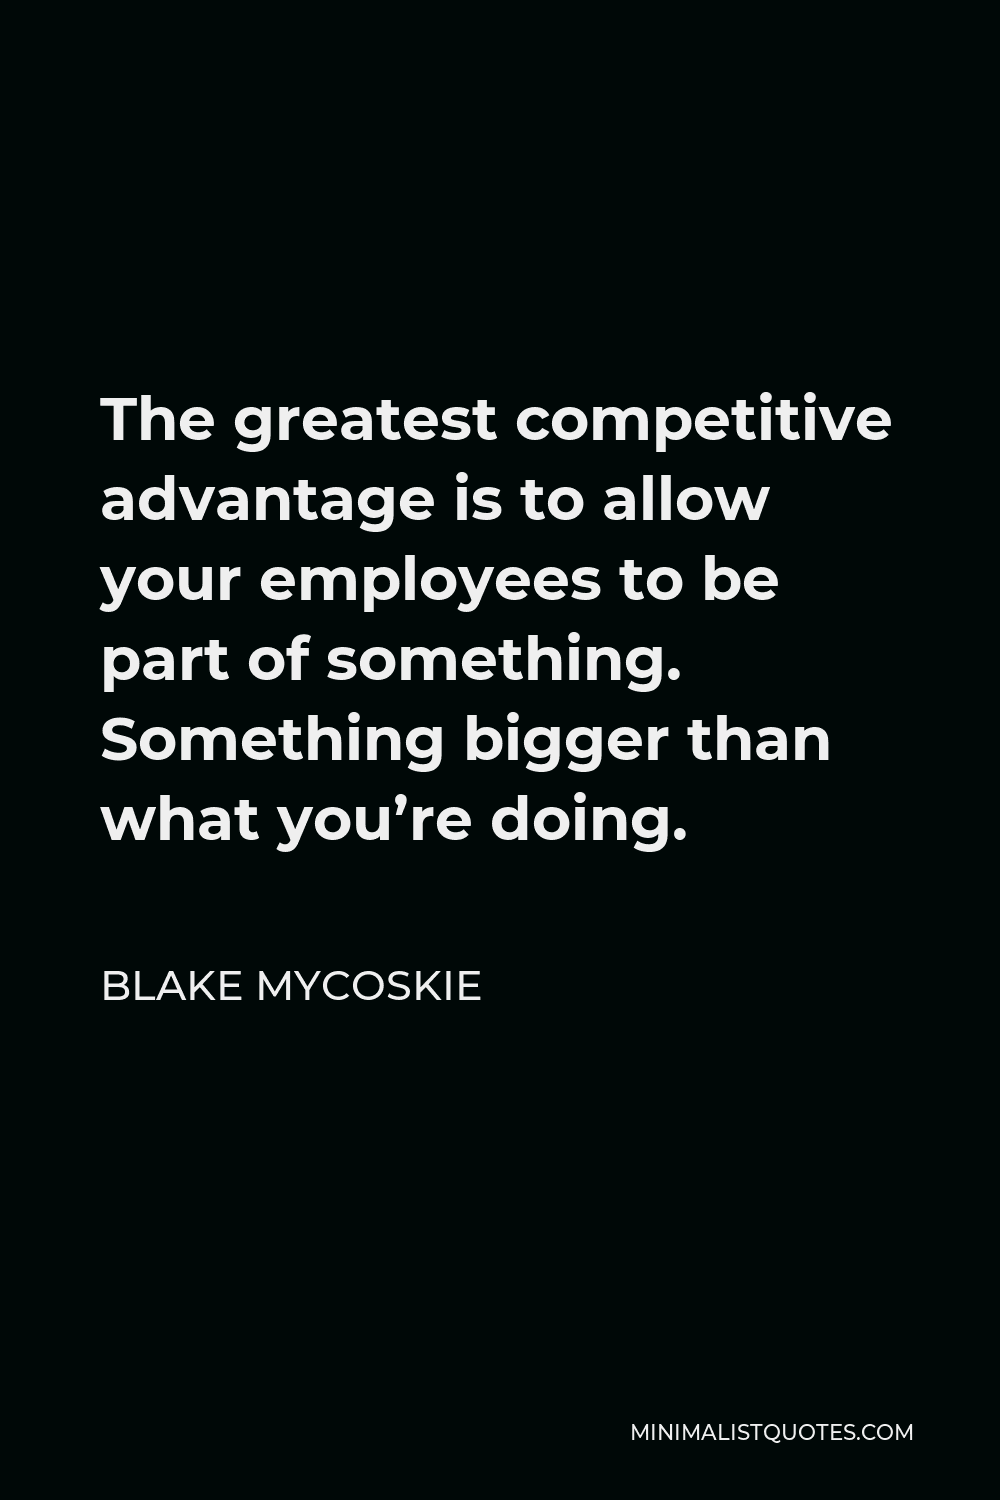 Blake Mycoskie Quote - The greatest competitive advantage is to allow your employees to be part of something. Something bigger than what you’re doing.